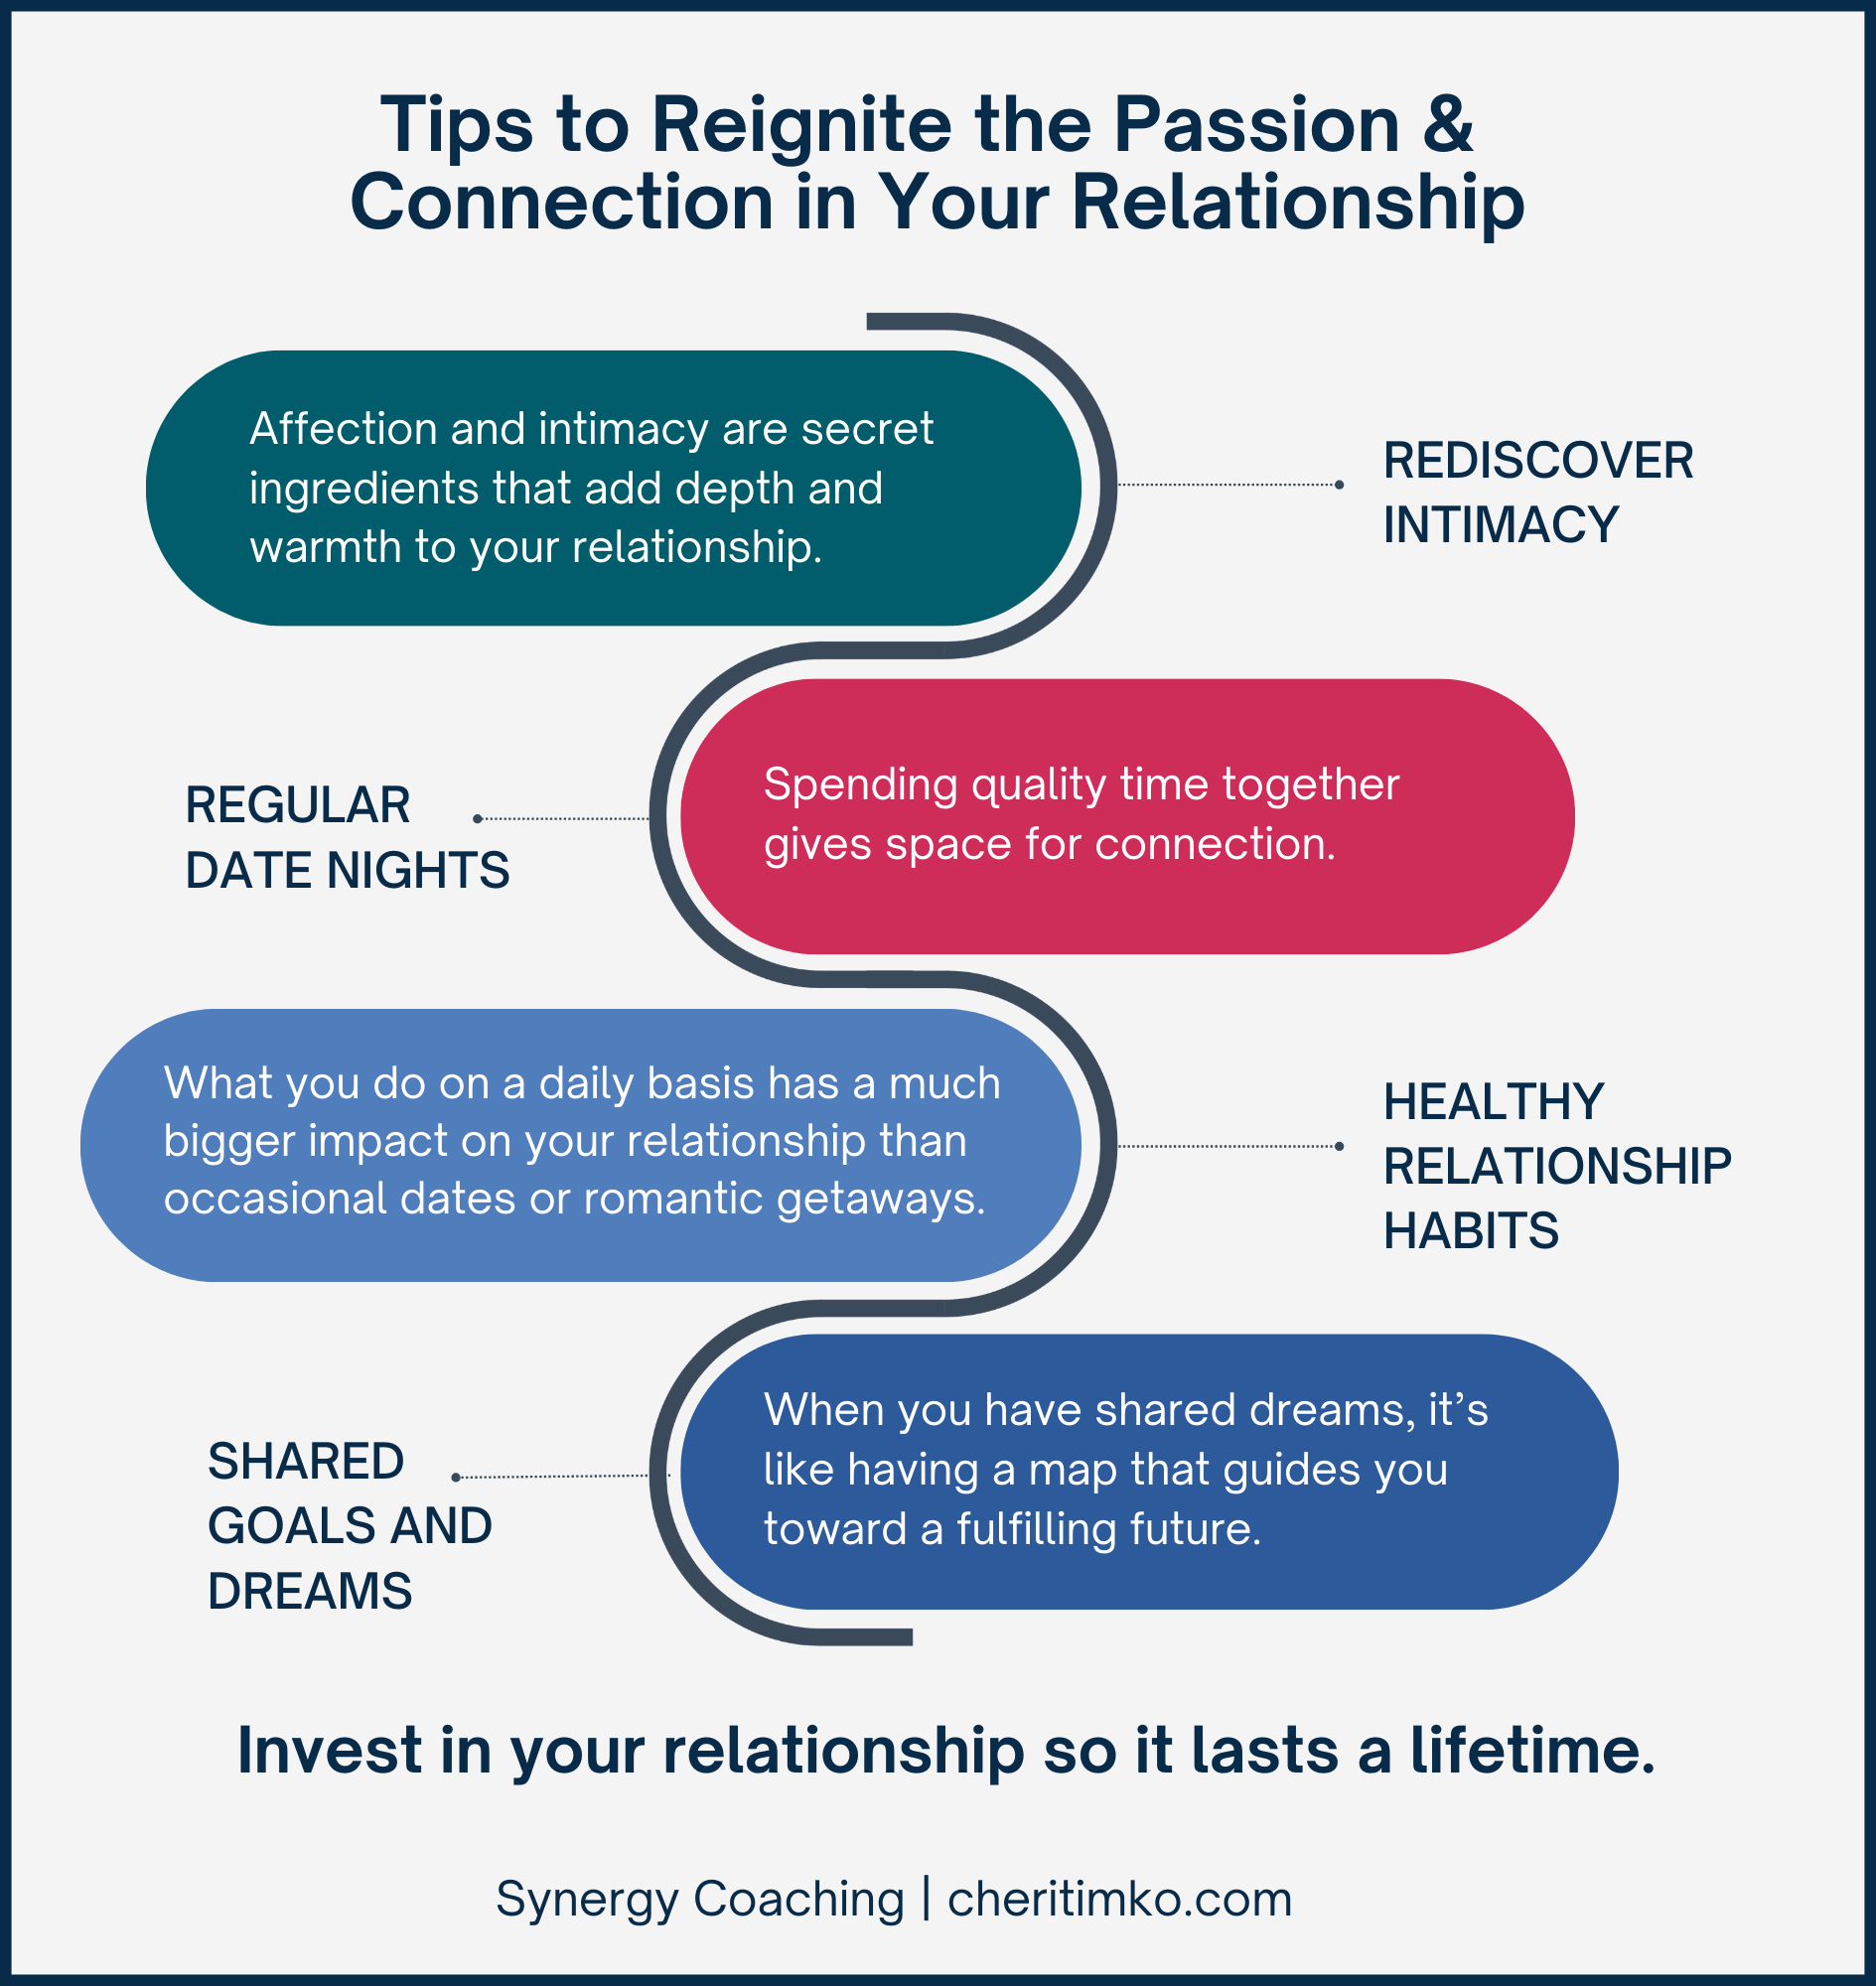 Tips to Reignite the Passion & Connection in Your Relationship